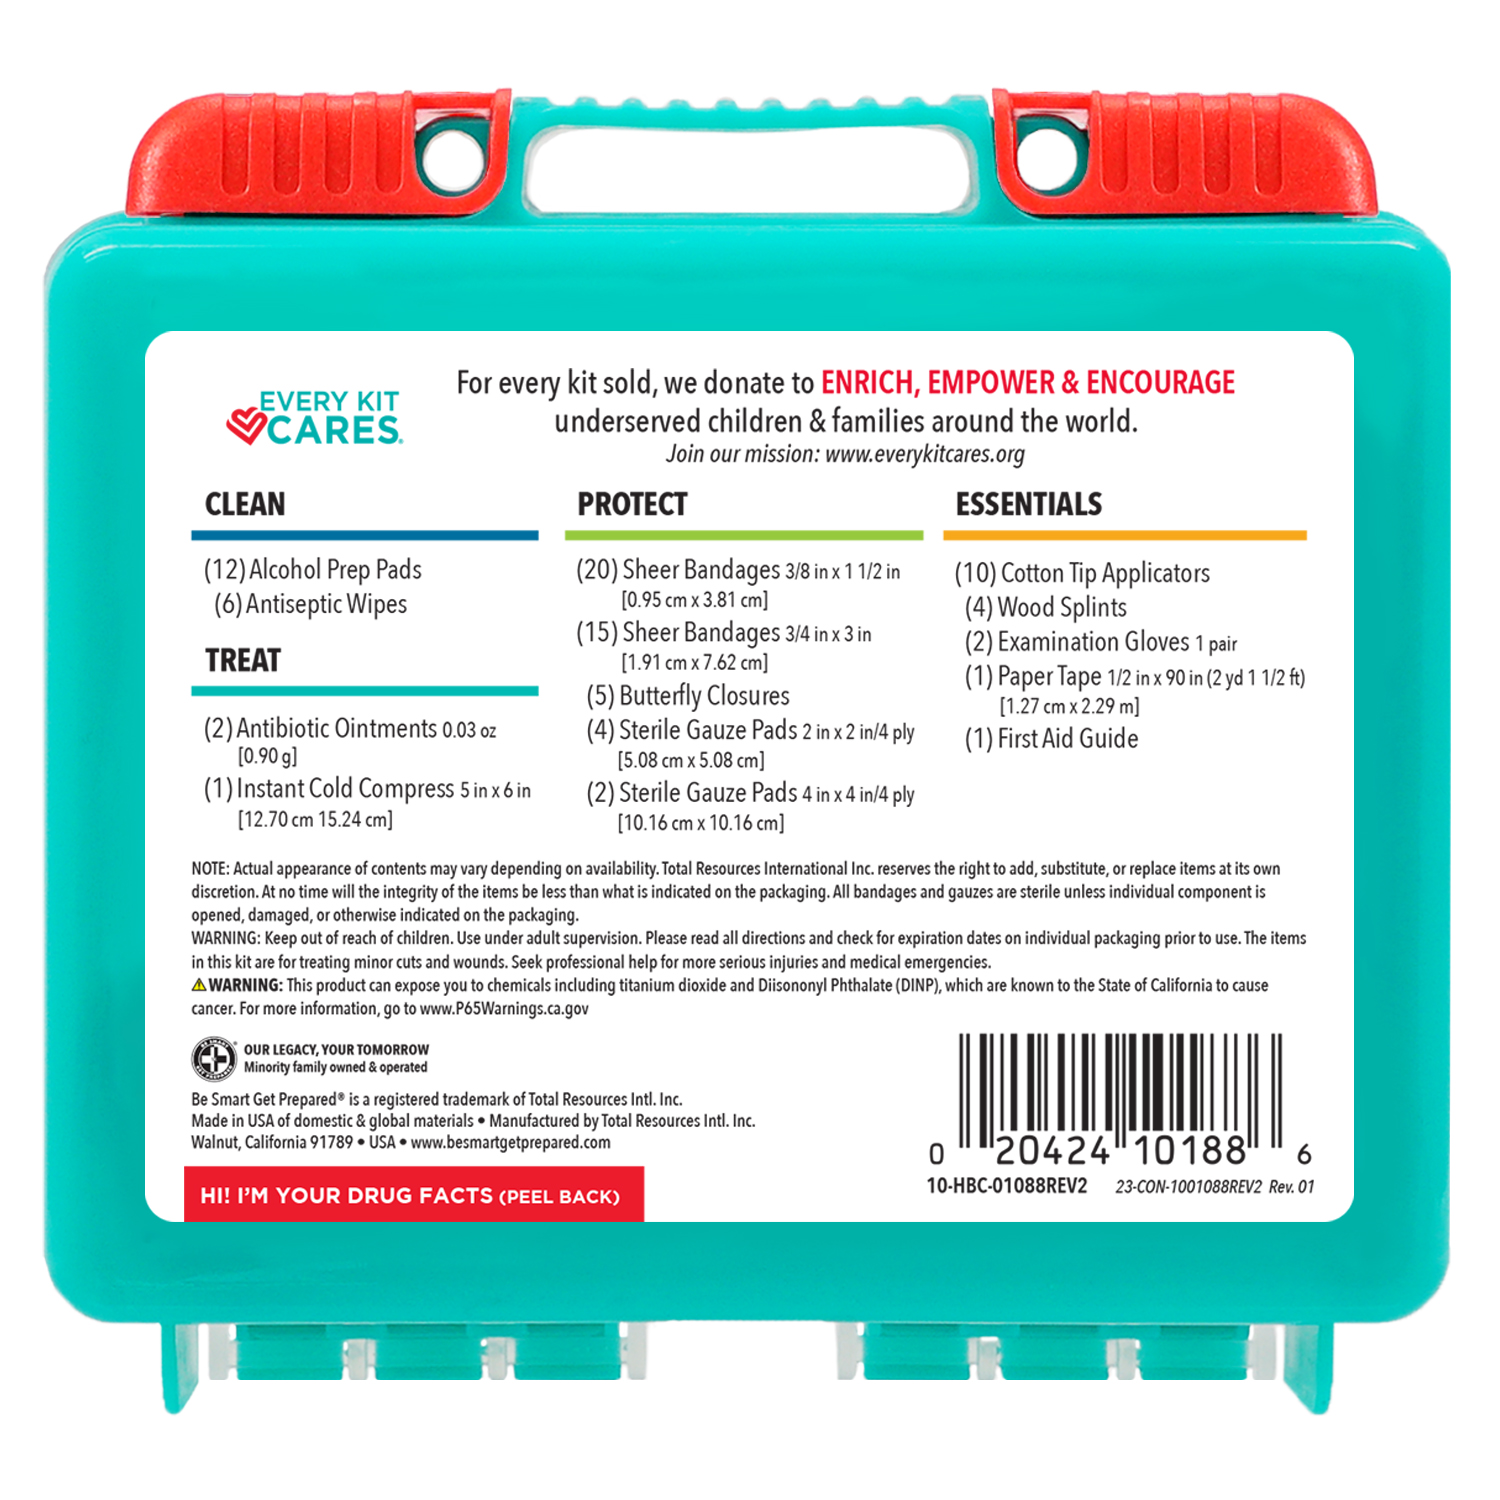 Be Smart Get Prepared First Aid Kit, 85 count - image 3 of 7